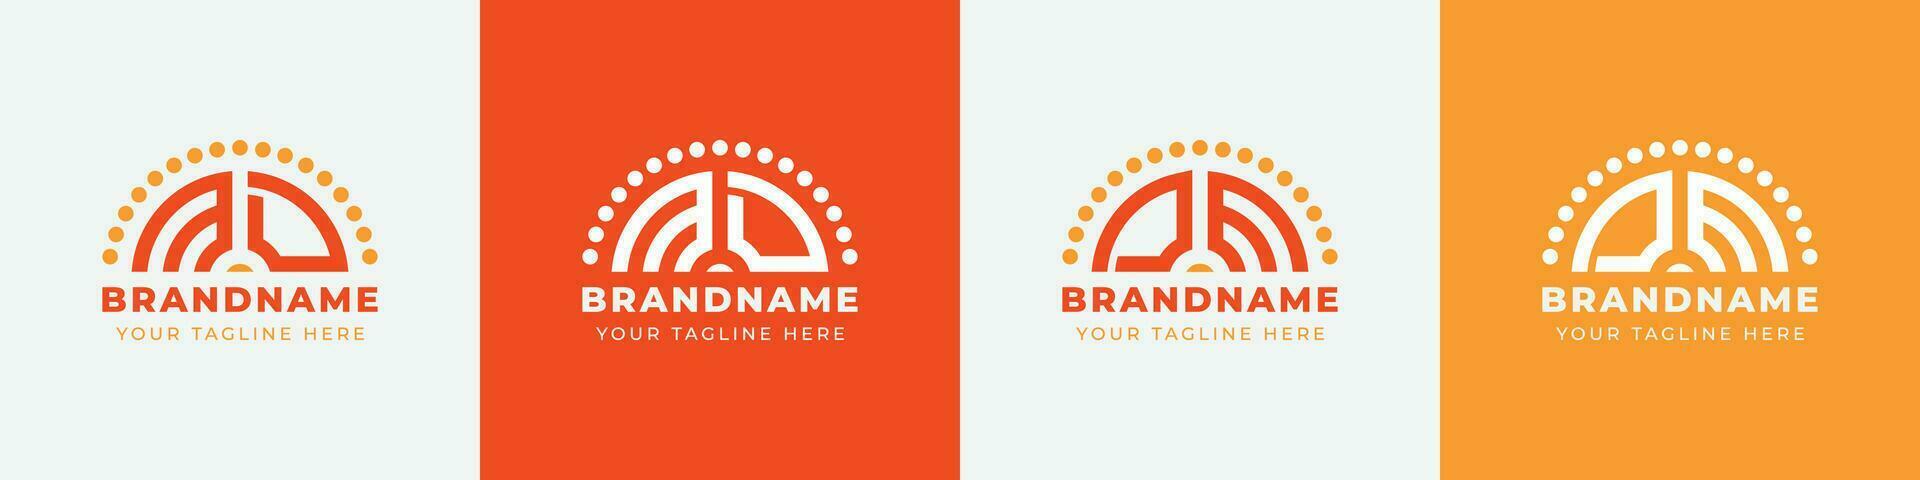 Letter DM and MD or DE and ED Sunrise  Logo Set, suitable for any business with DM, MD, DE, ED initials. vector